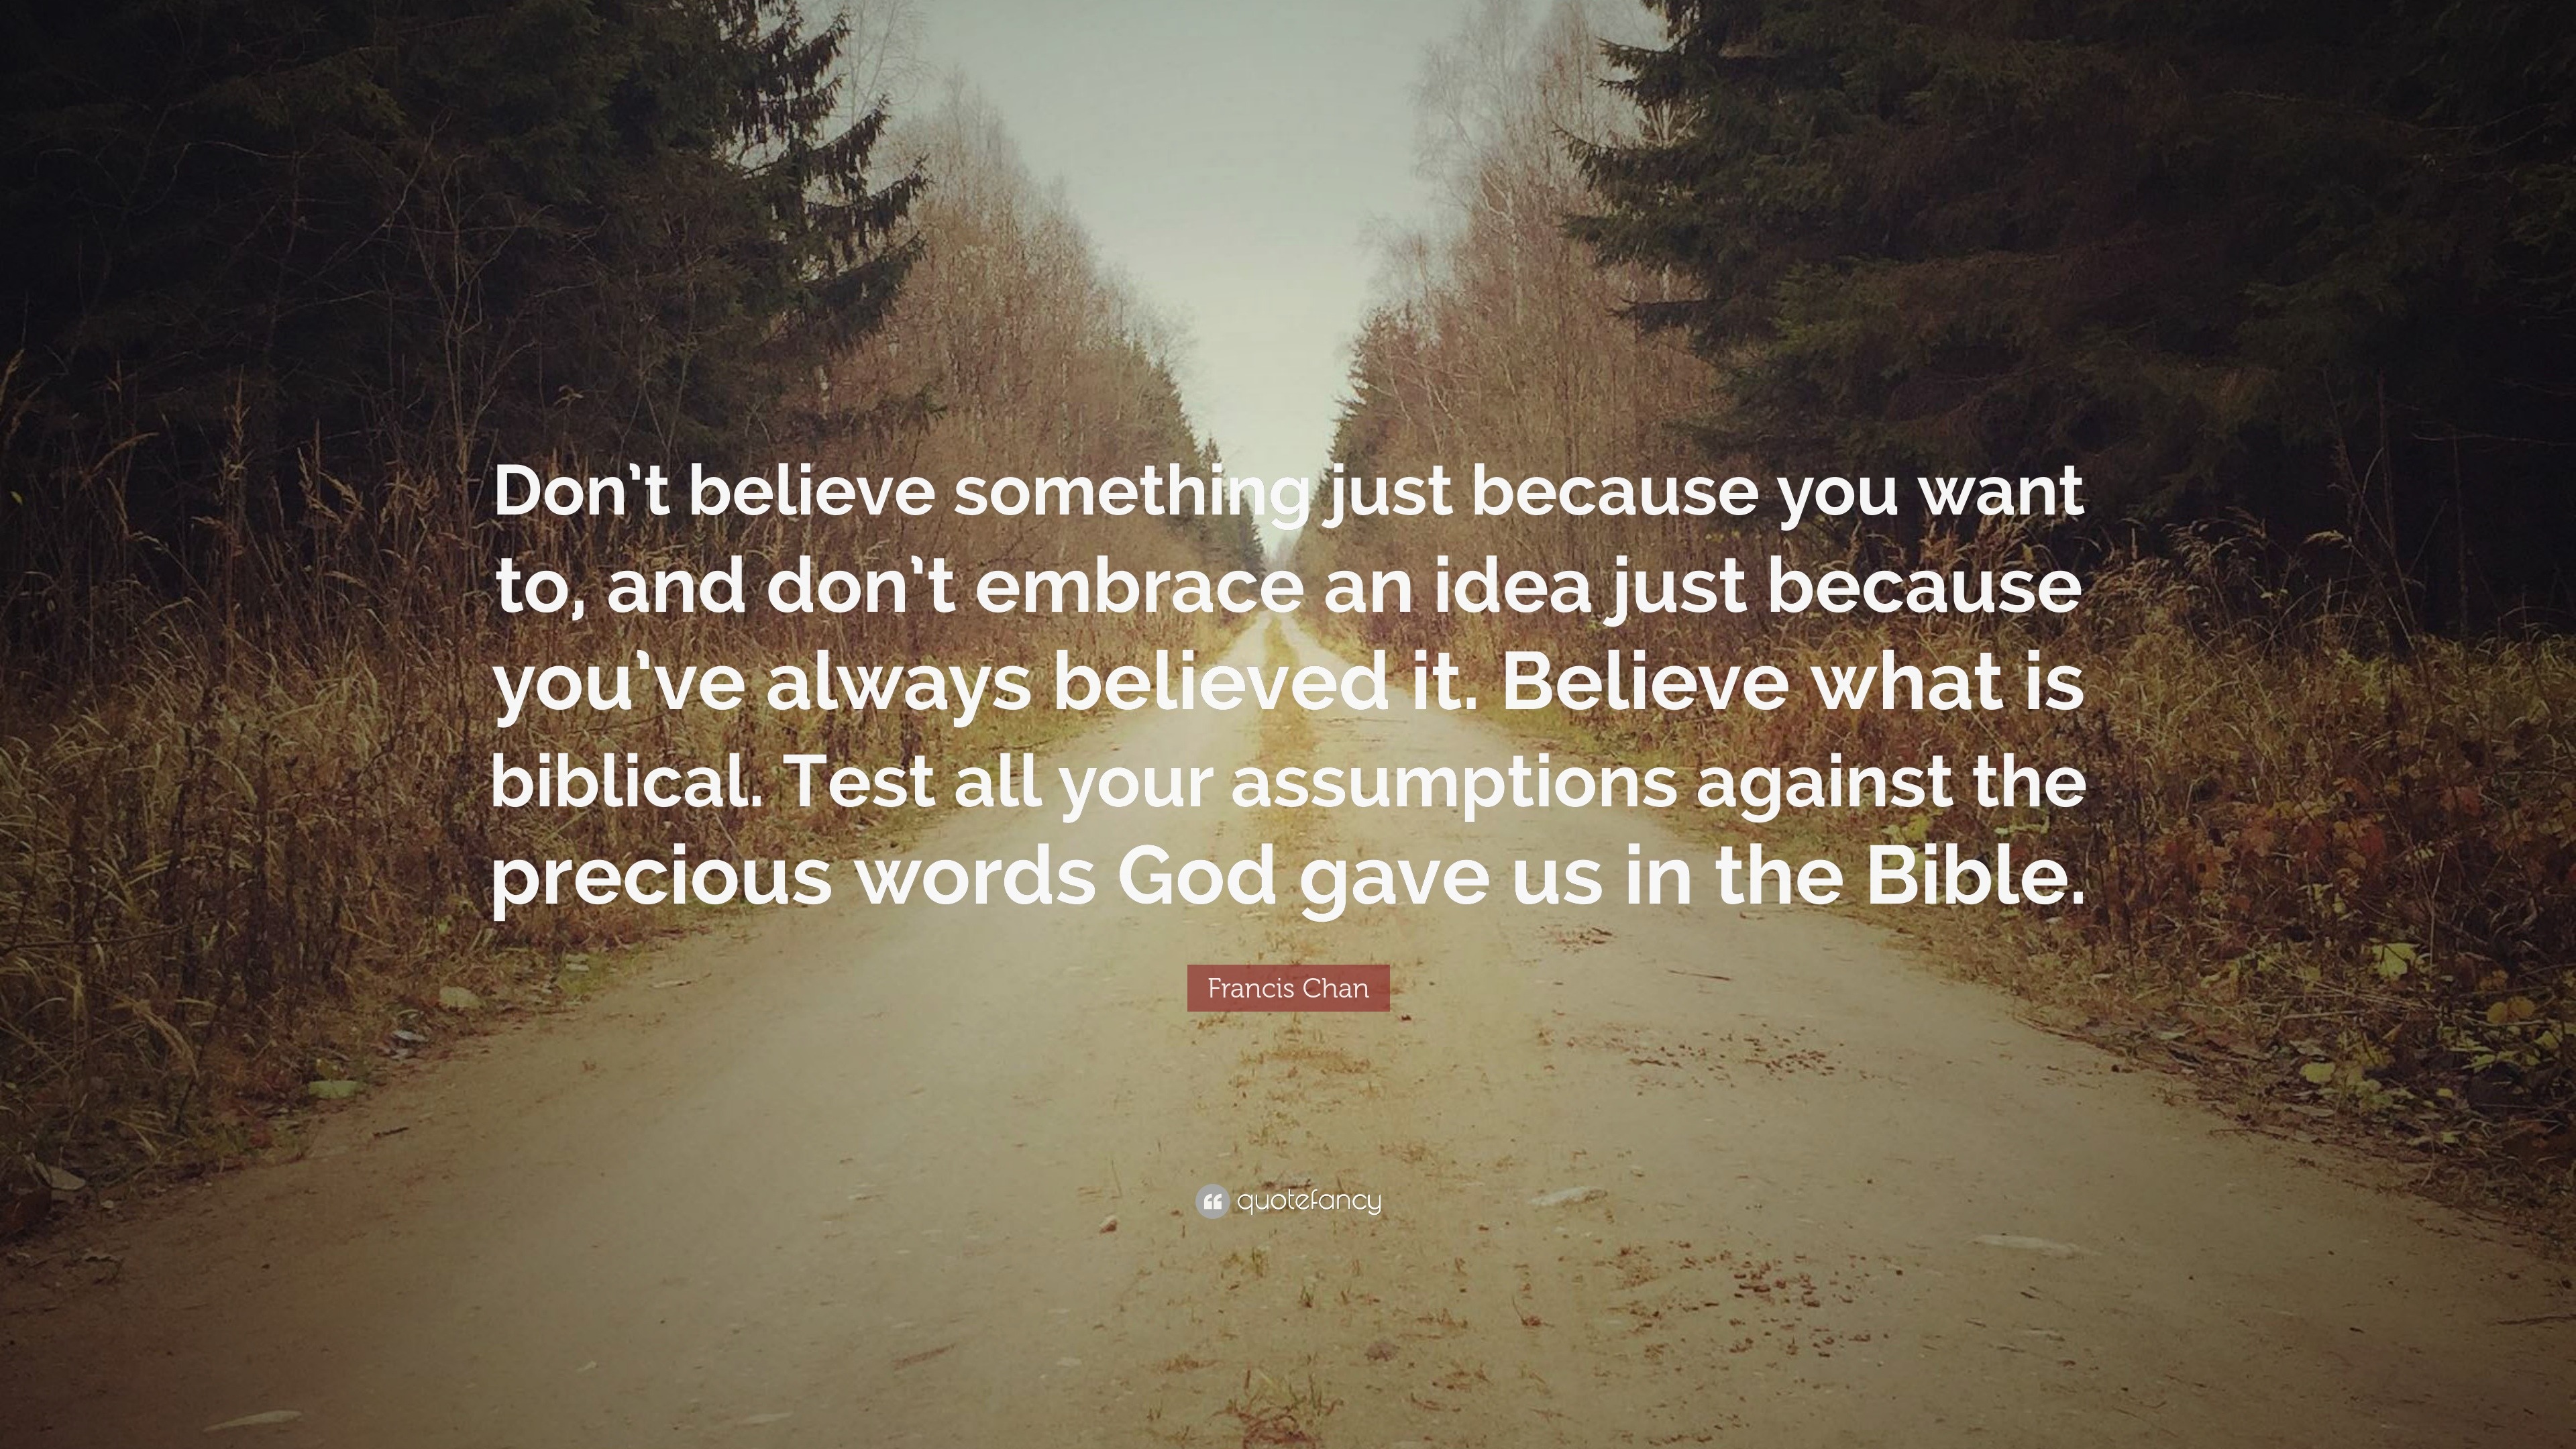 Francis Chan Quote: “Don’t believe something just because you want to ...